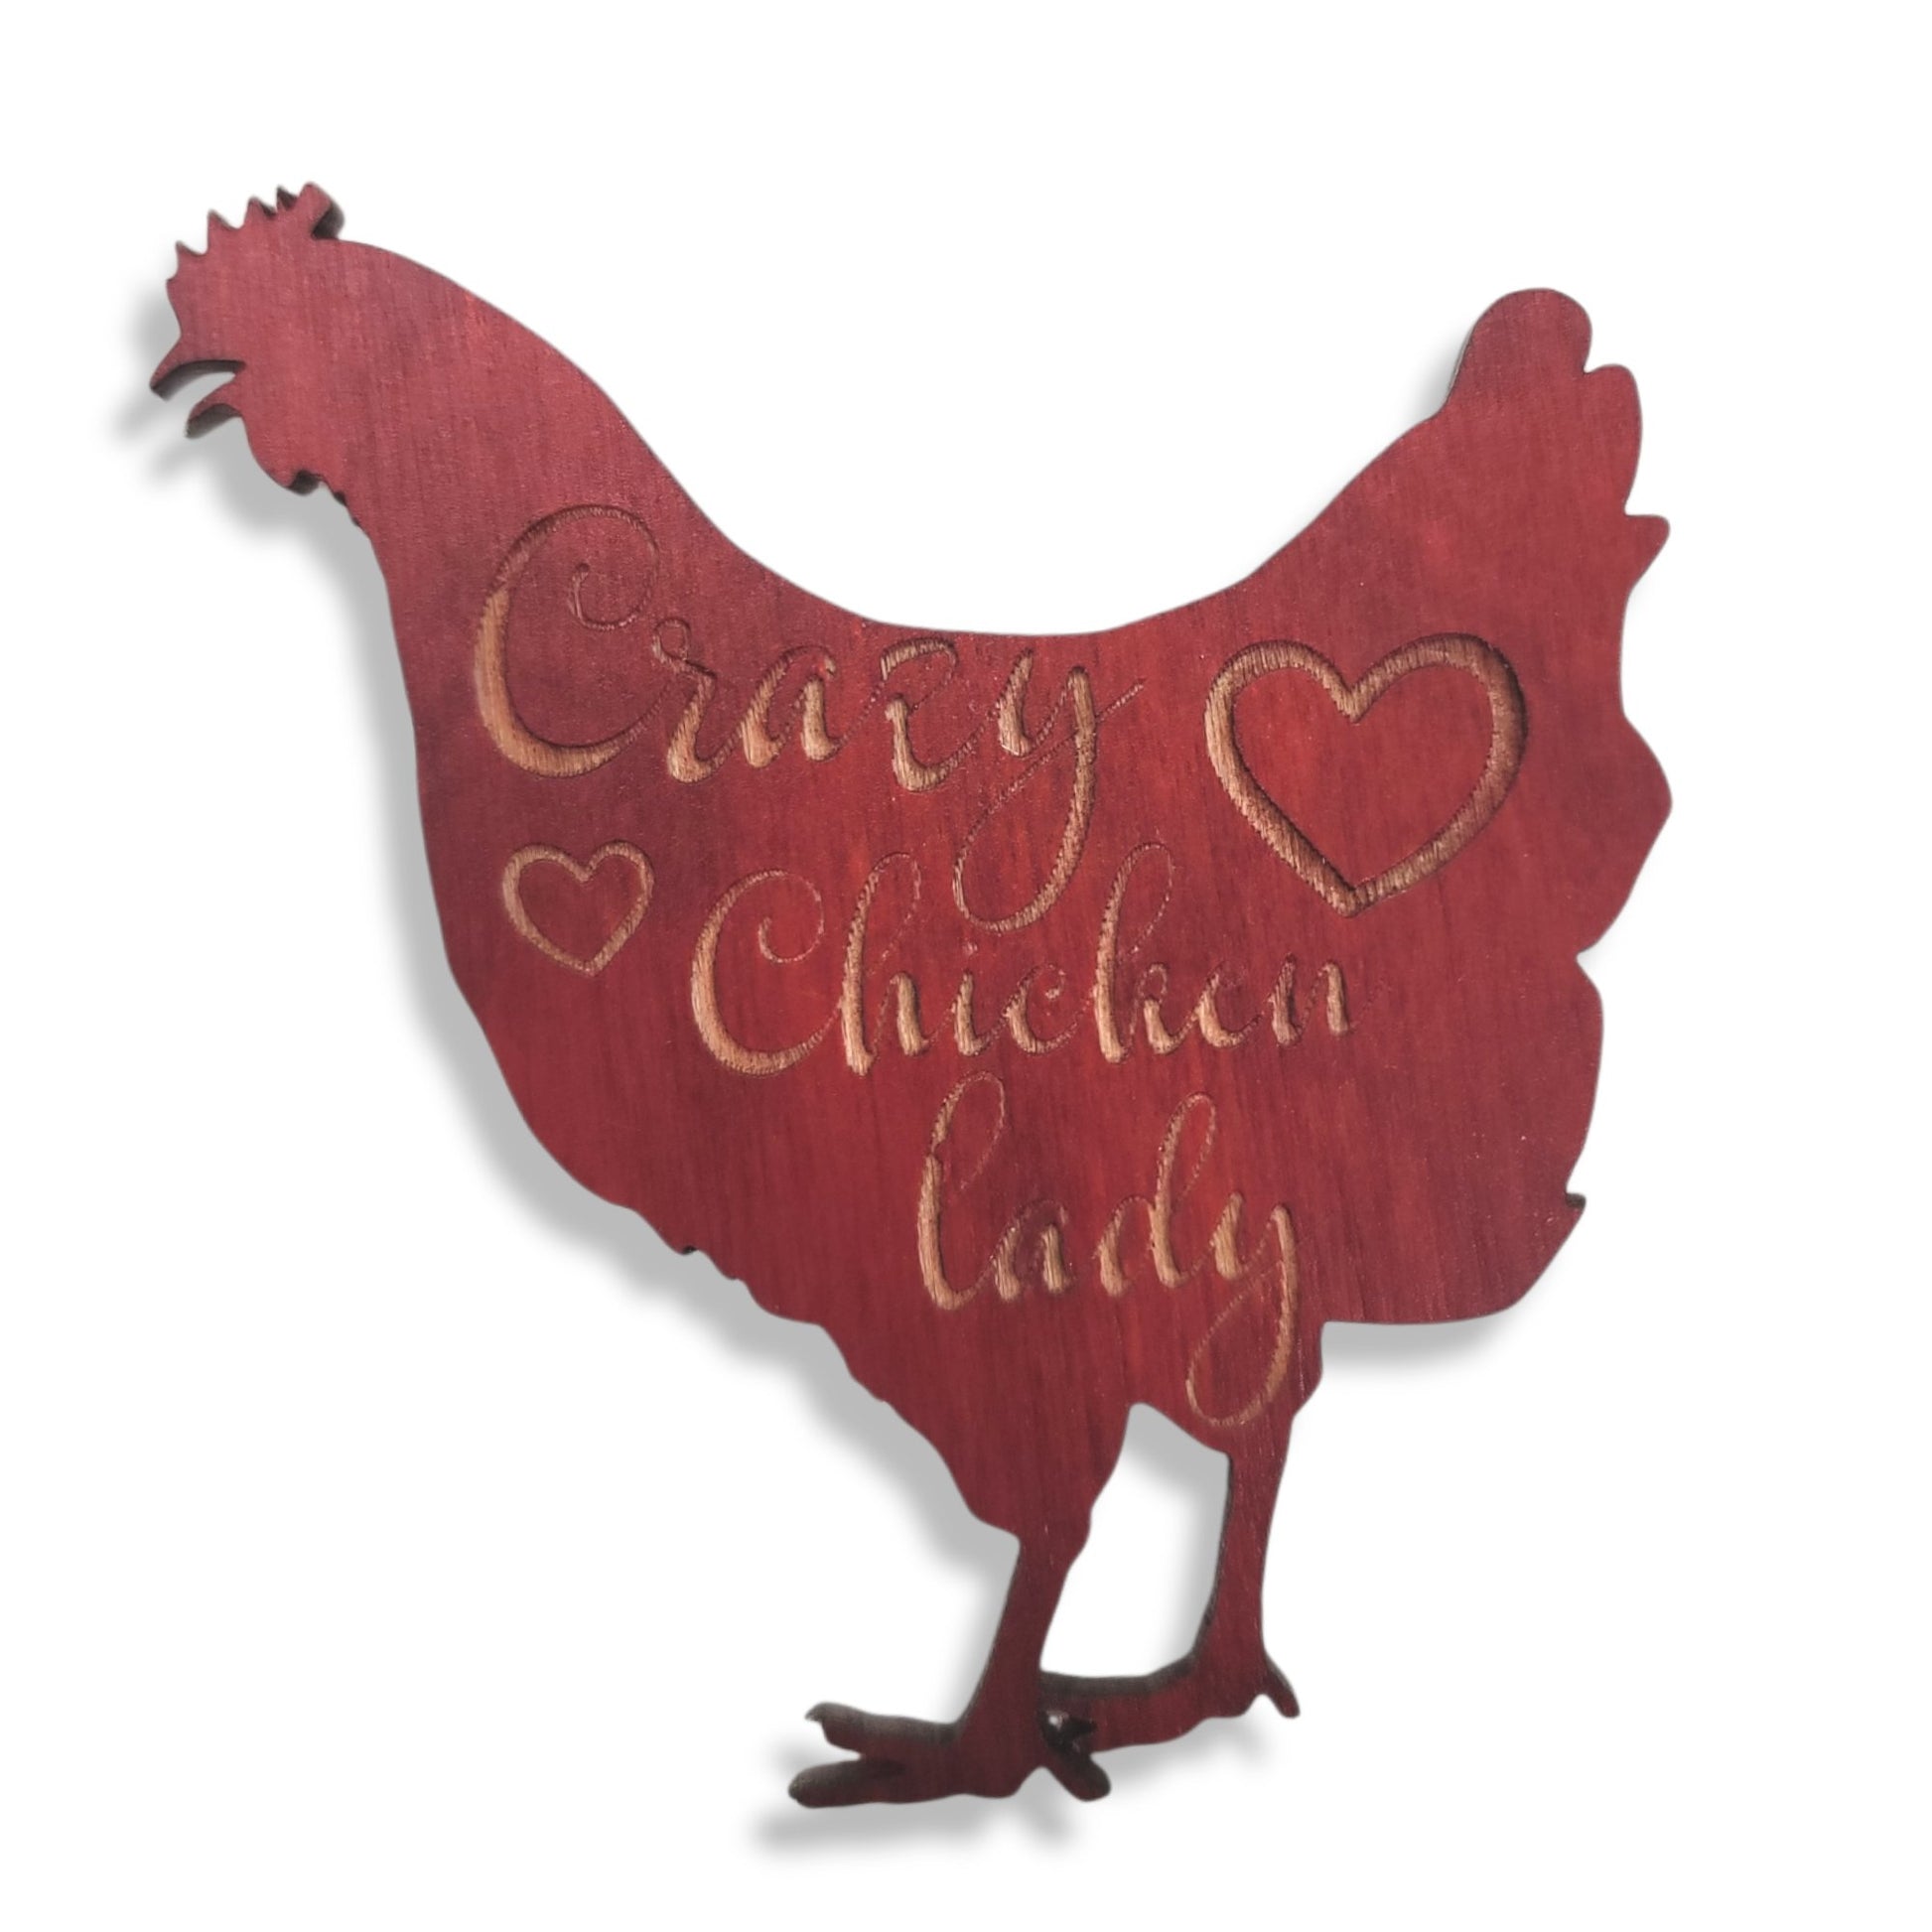 Wall Art Crazy Chicken Lady Interior or Exterior Sign | Jones Laser Craft Personalized Gift